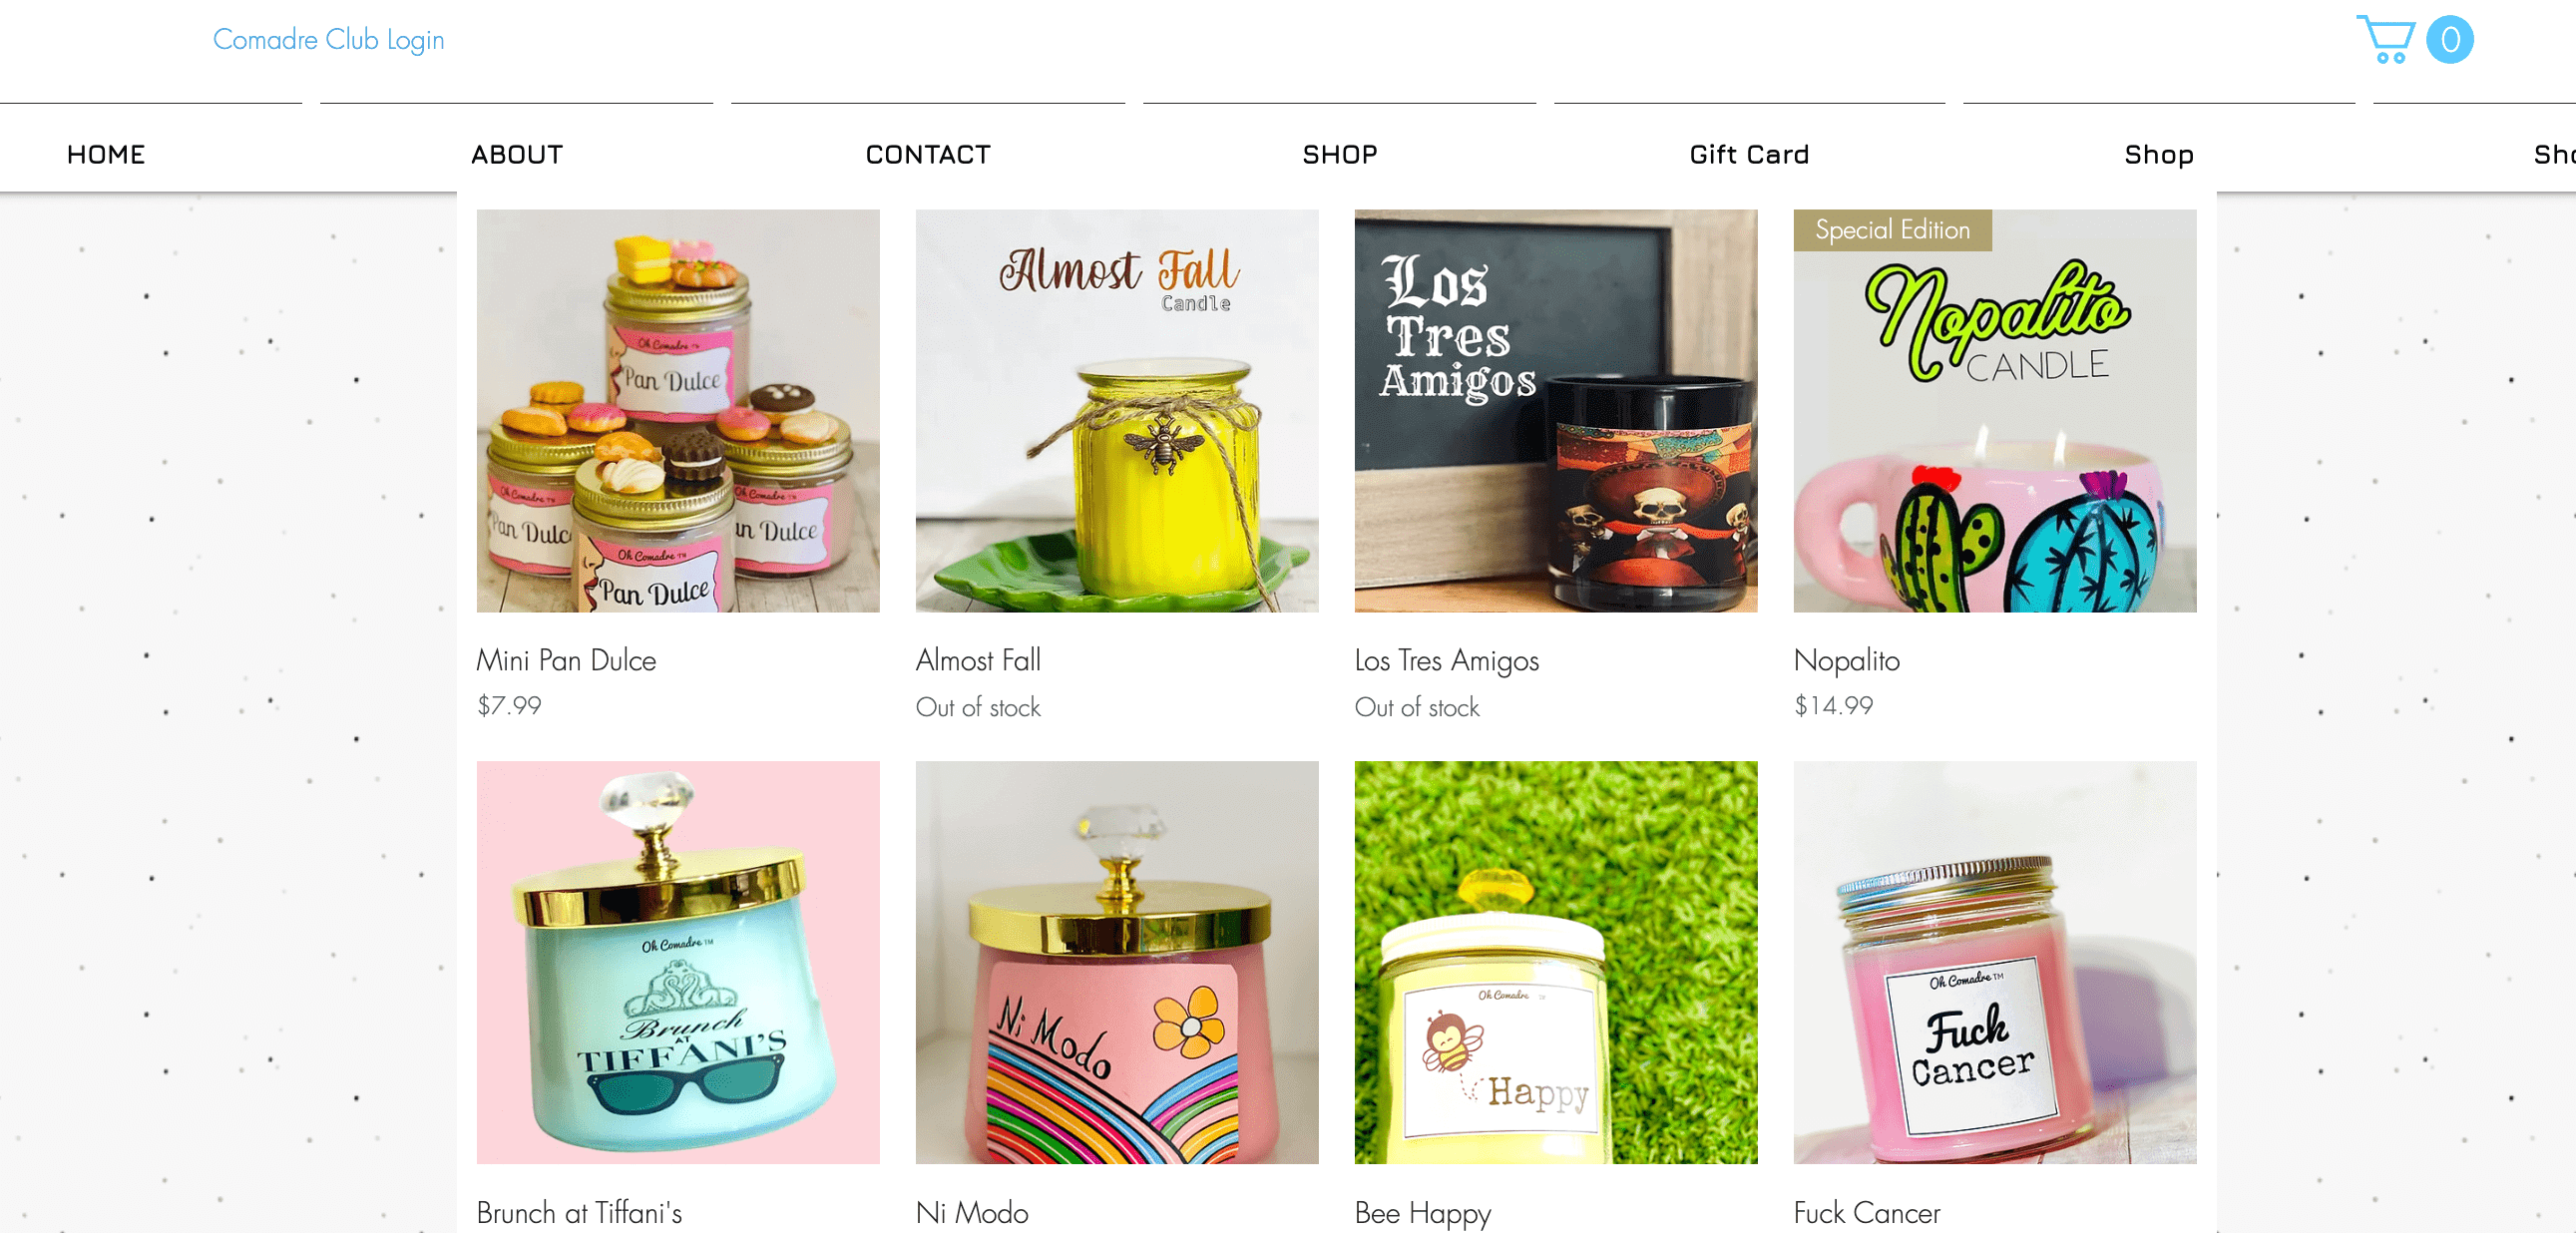 15 latino and latina-owned businesses to support during hispanic heritage month screenshot of oh comadre candles shop page